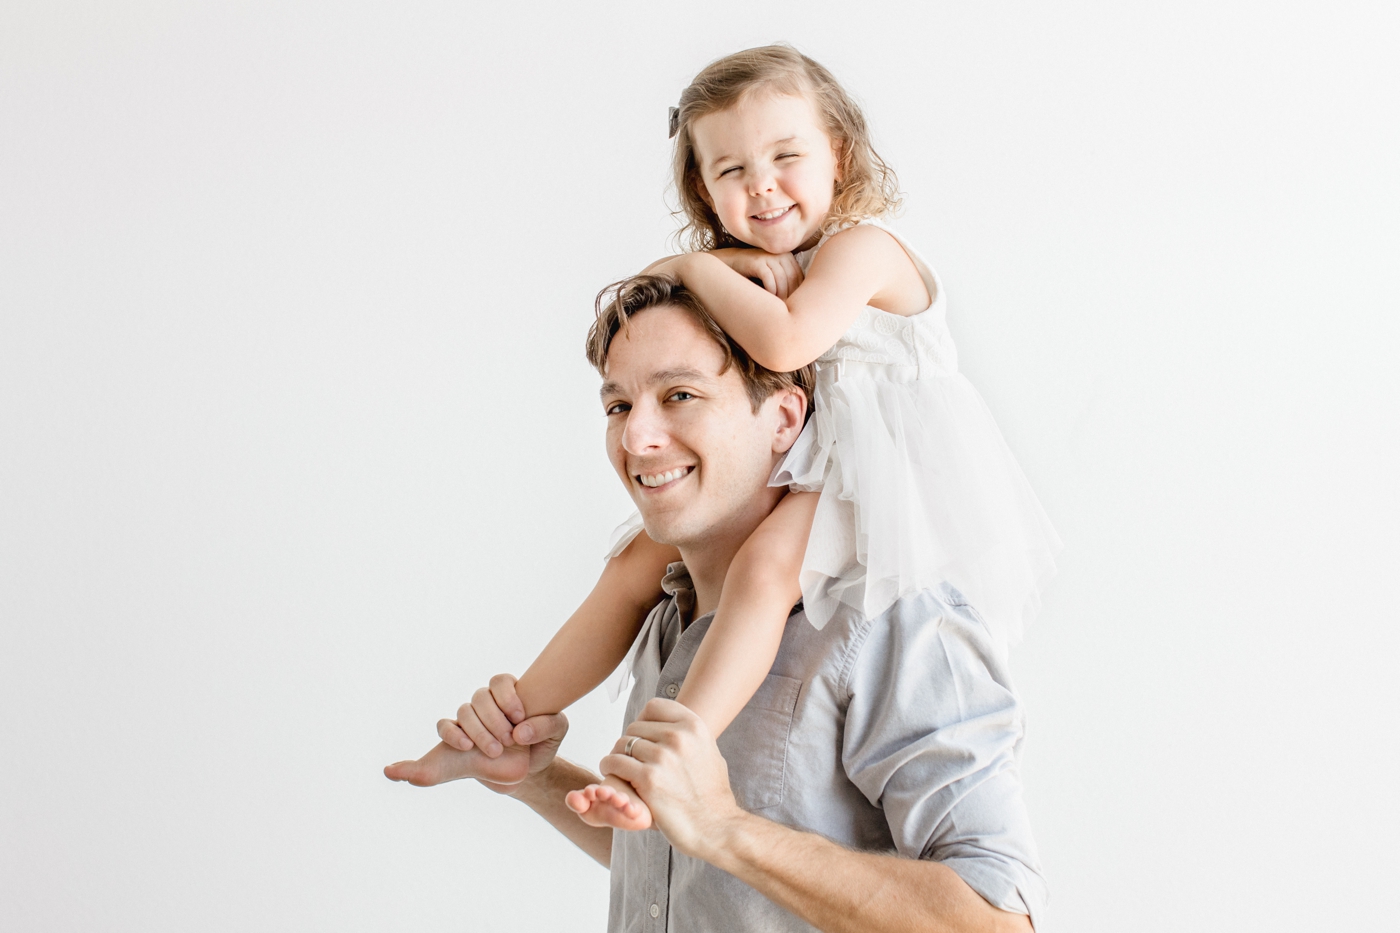 Little girl on Dad's shoulders during maternity session in Austin TX studio. Photo by Sana Ahmed Photography.